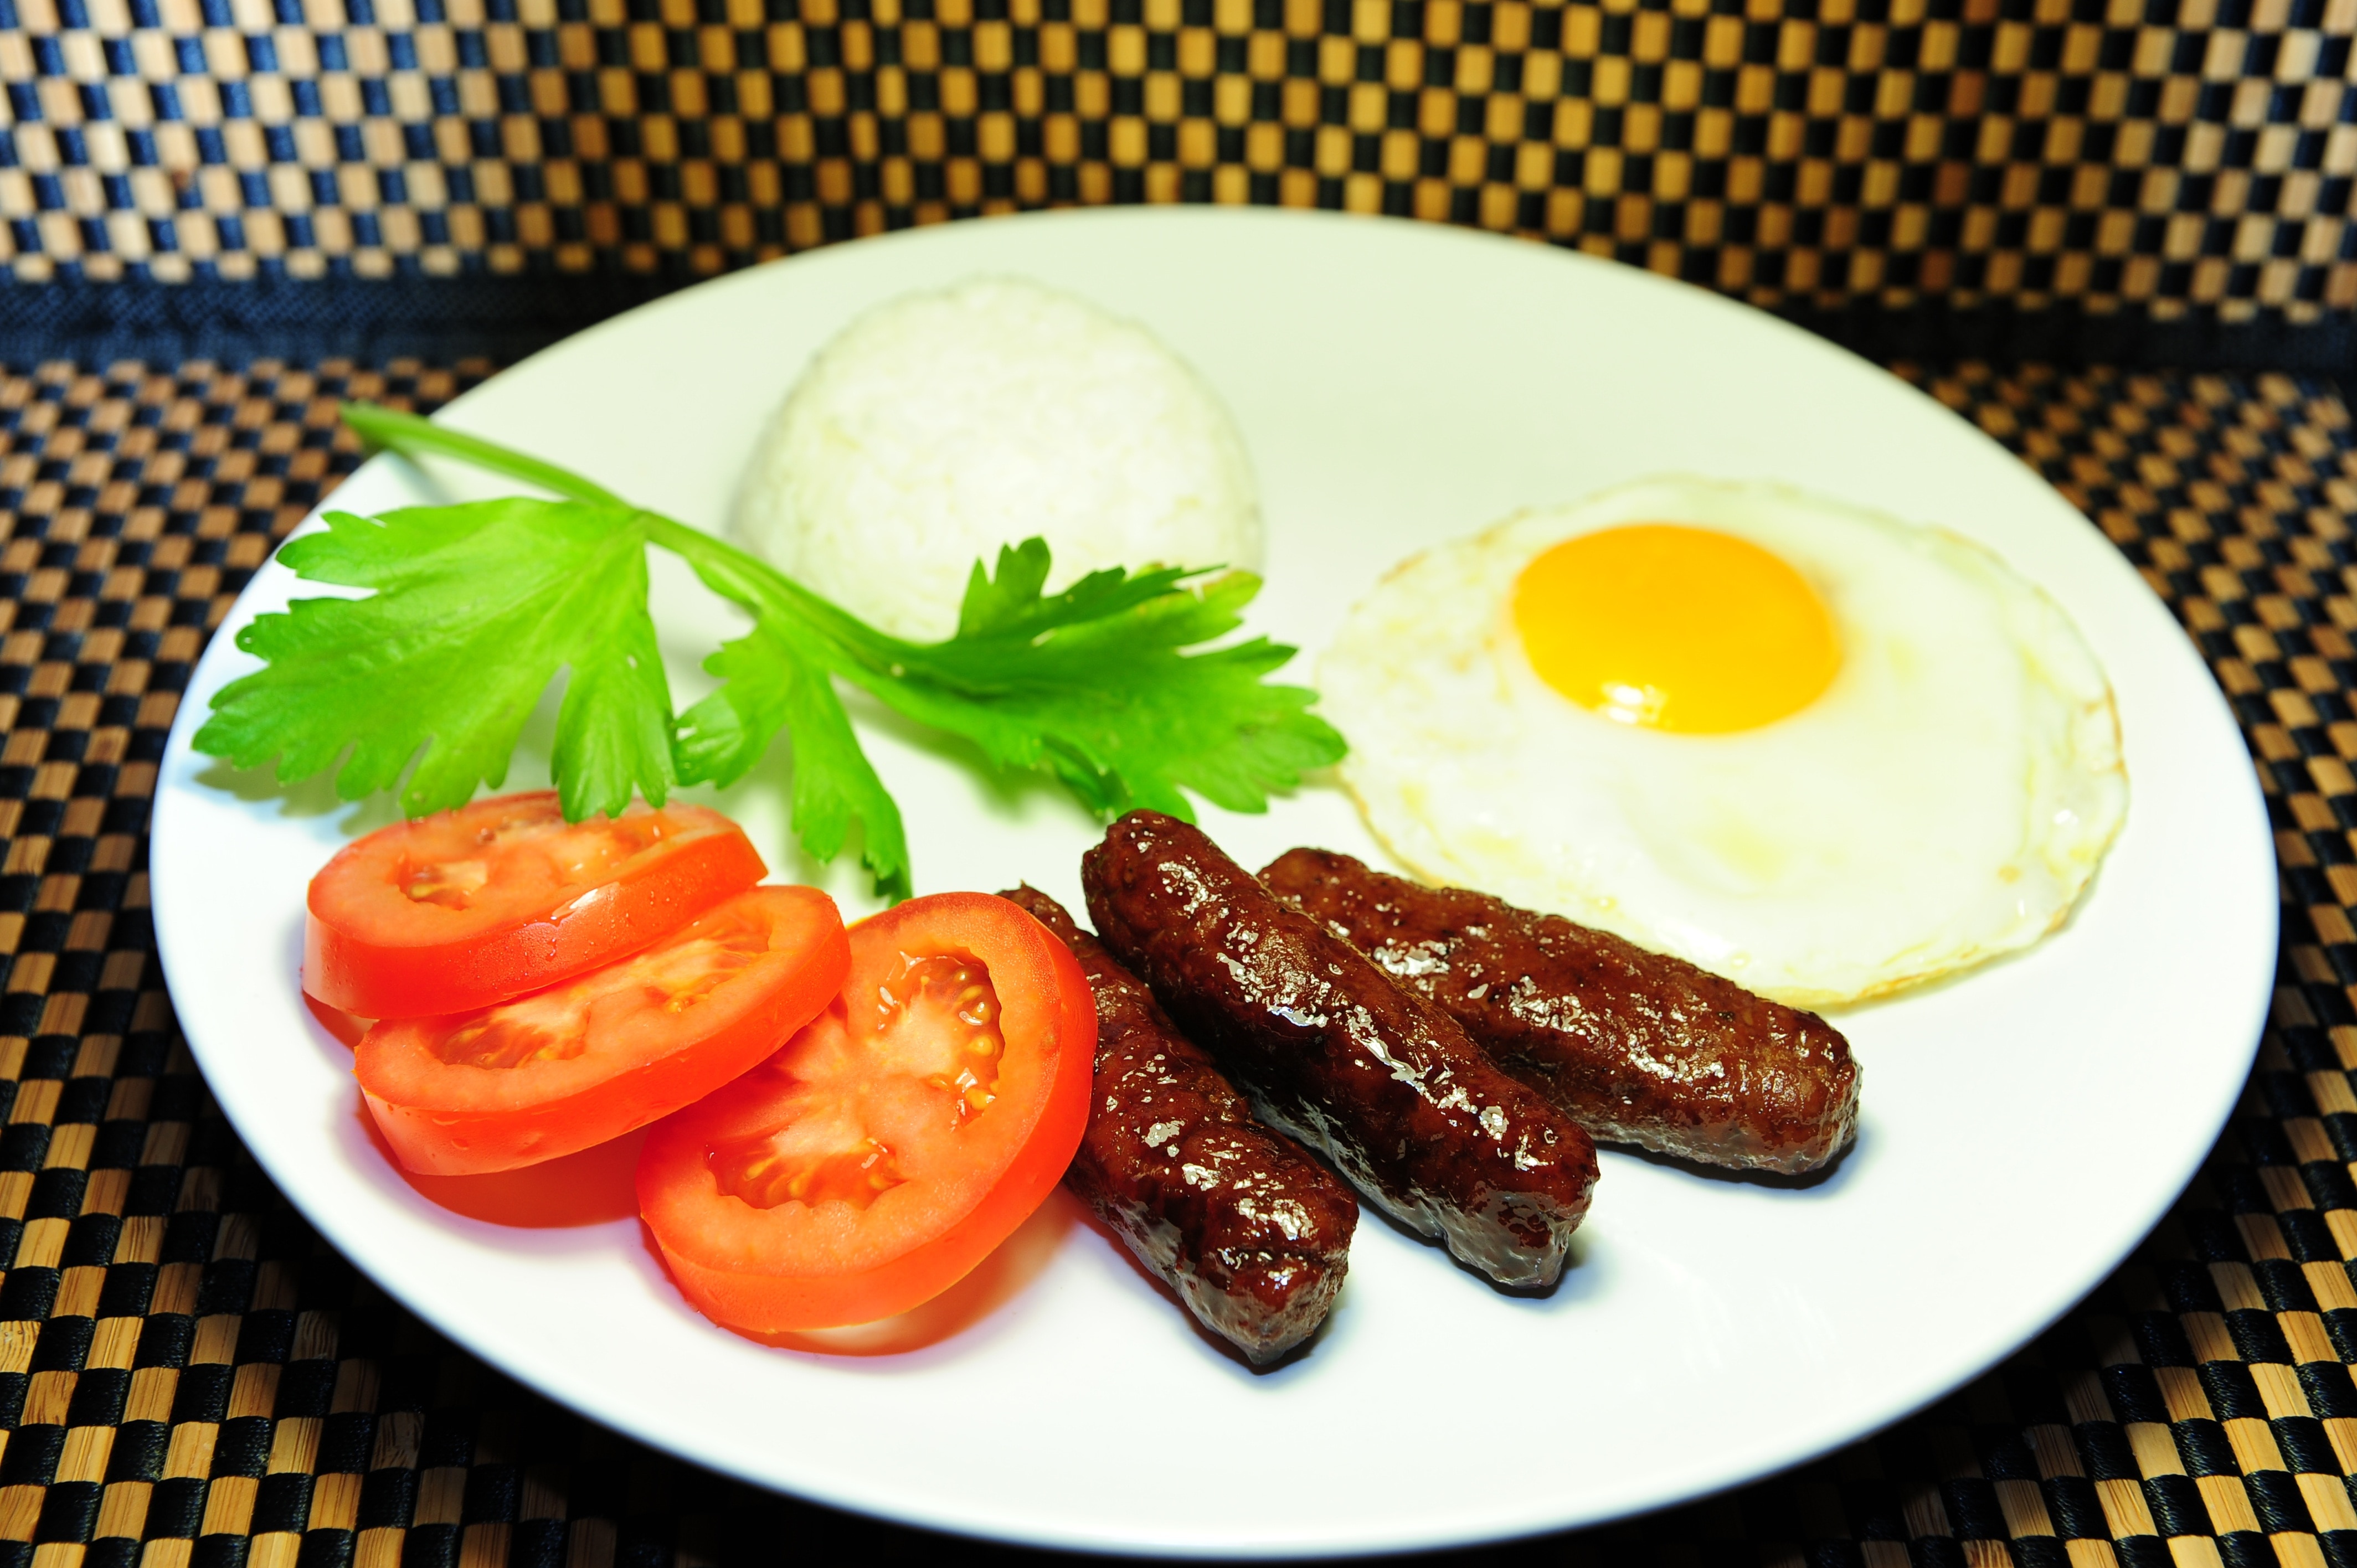 Sausage, Breakfast, Plate, Egg, Meal, food and drink, food